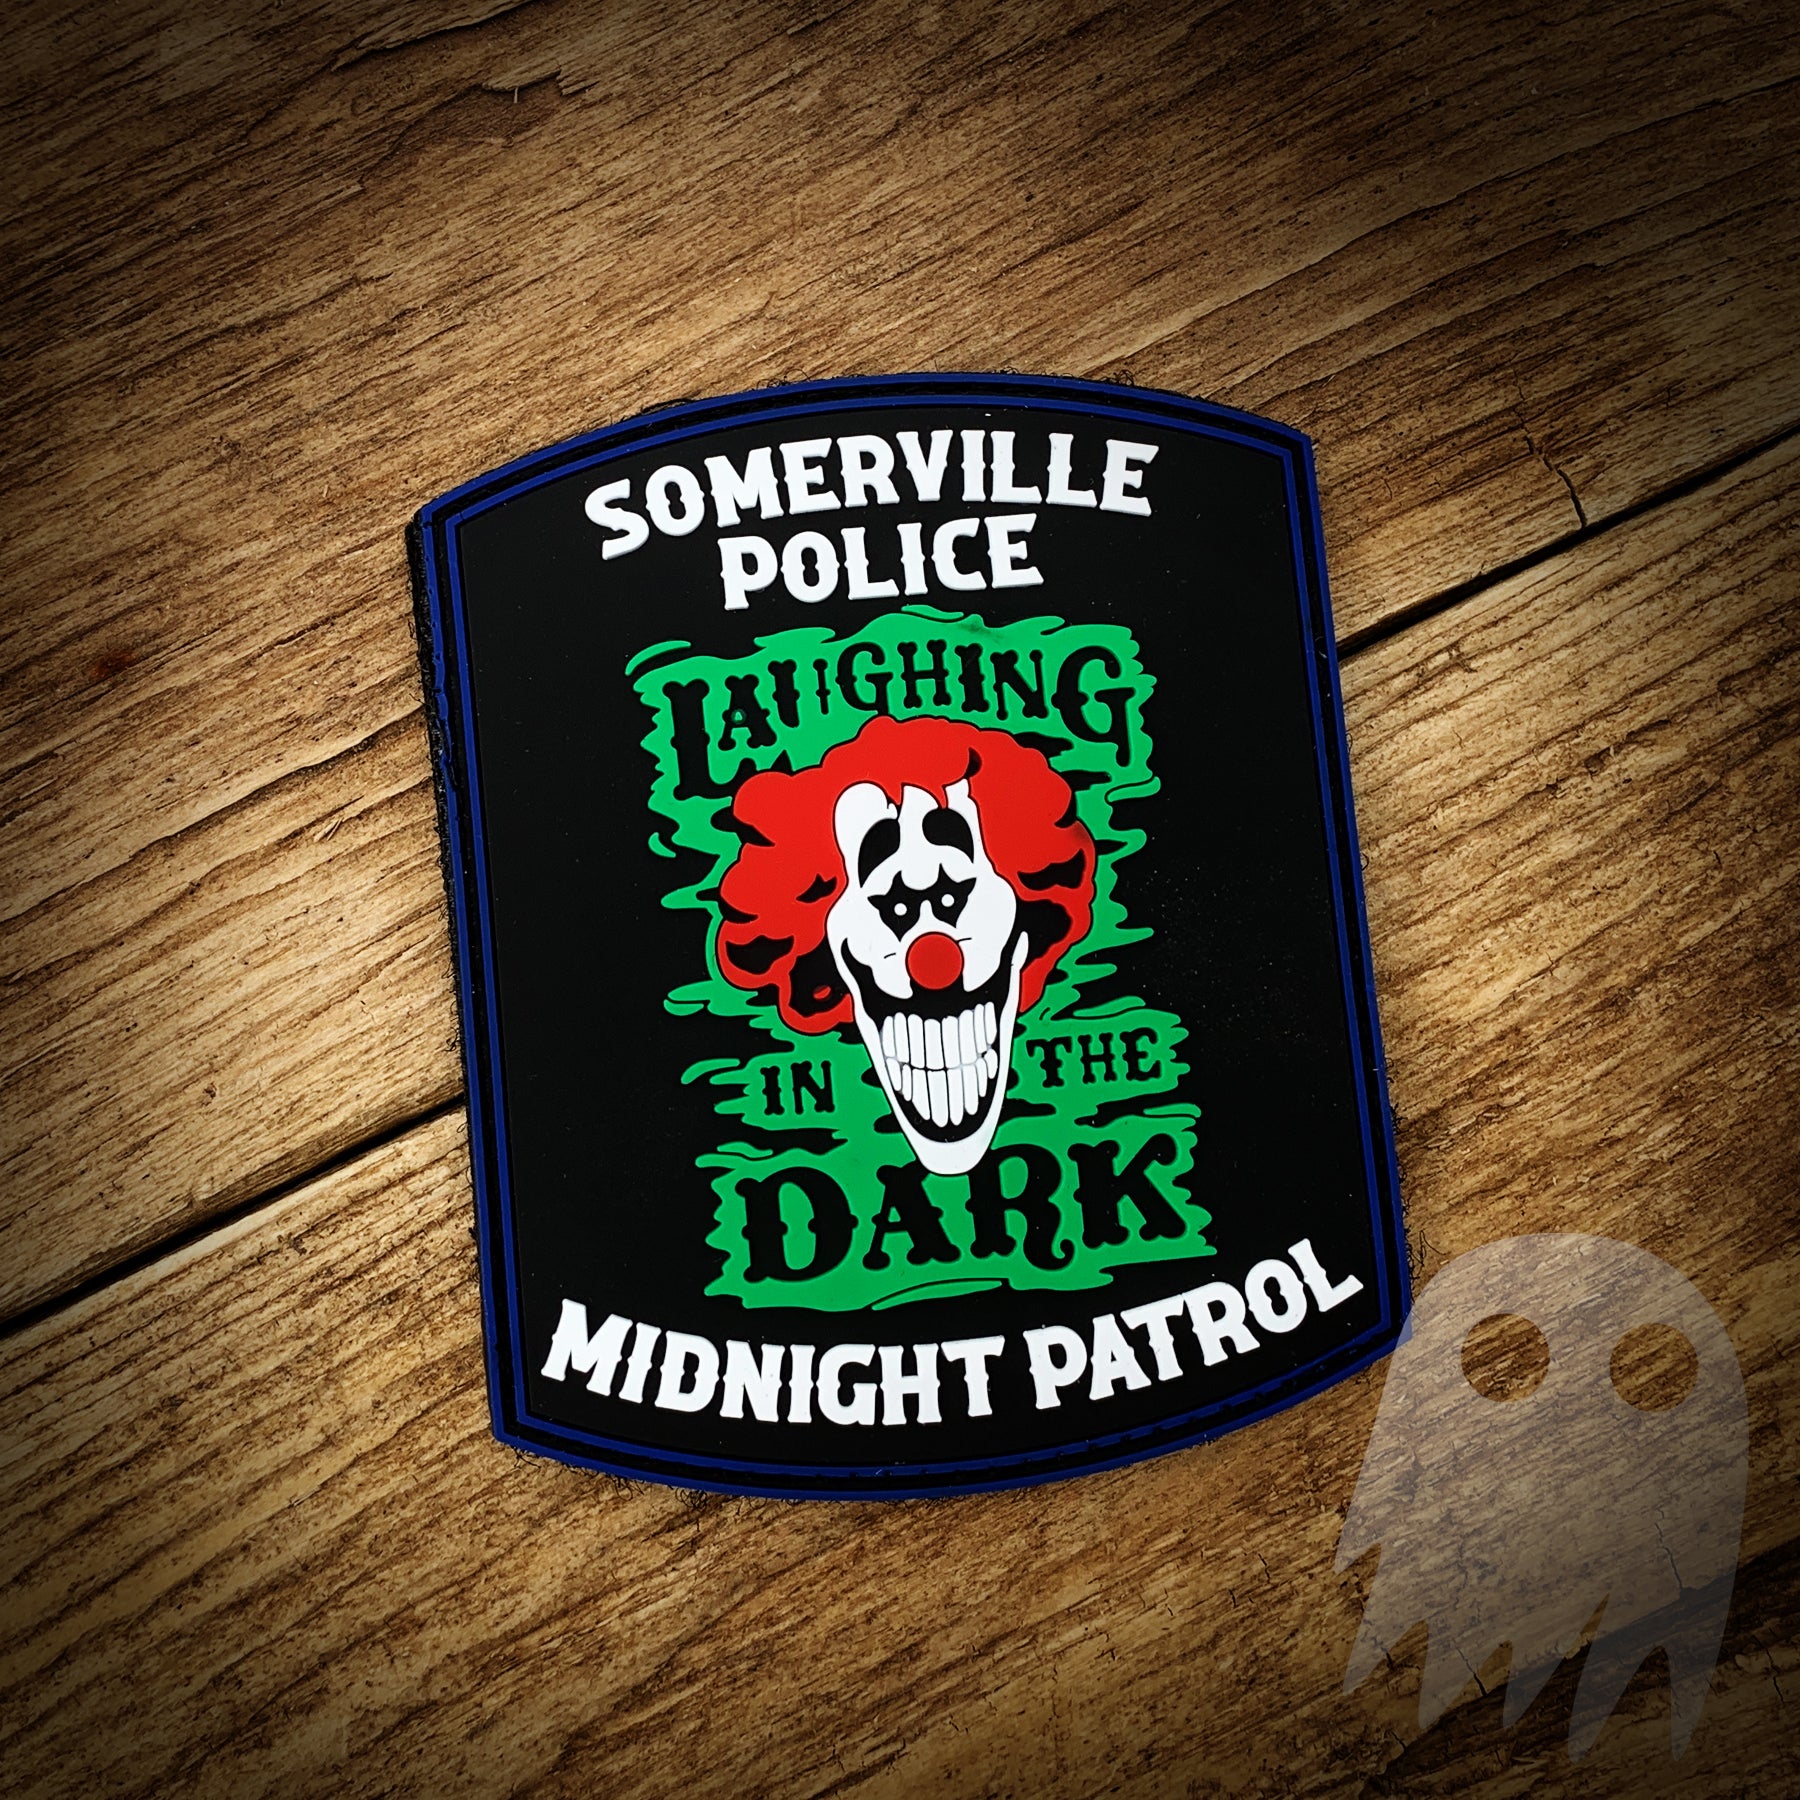 PVC Police Patch - Glow in the Dark, Velcro Backed